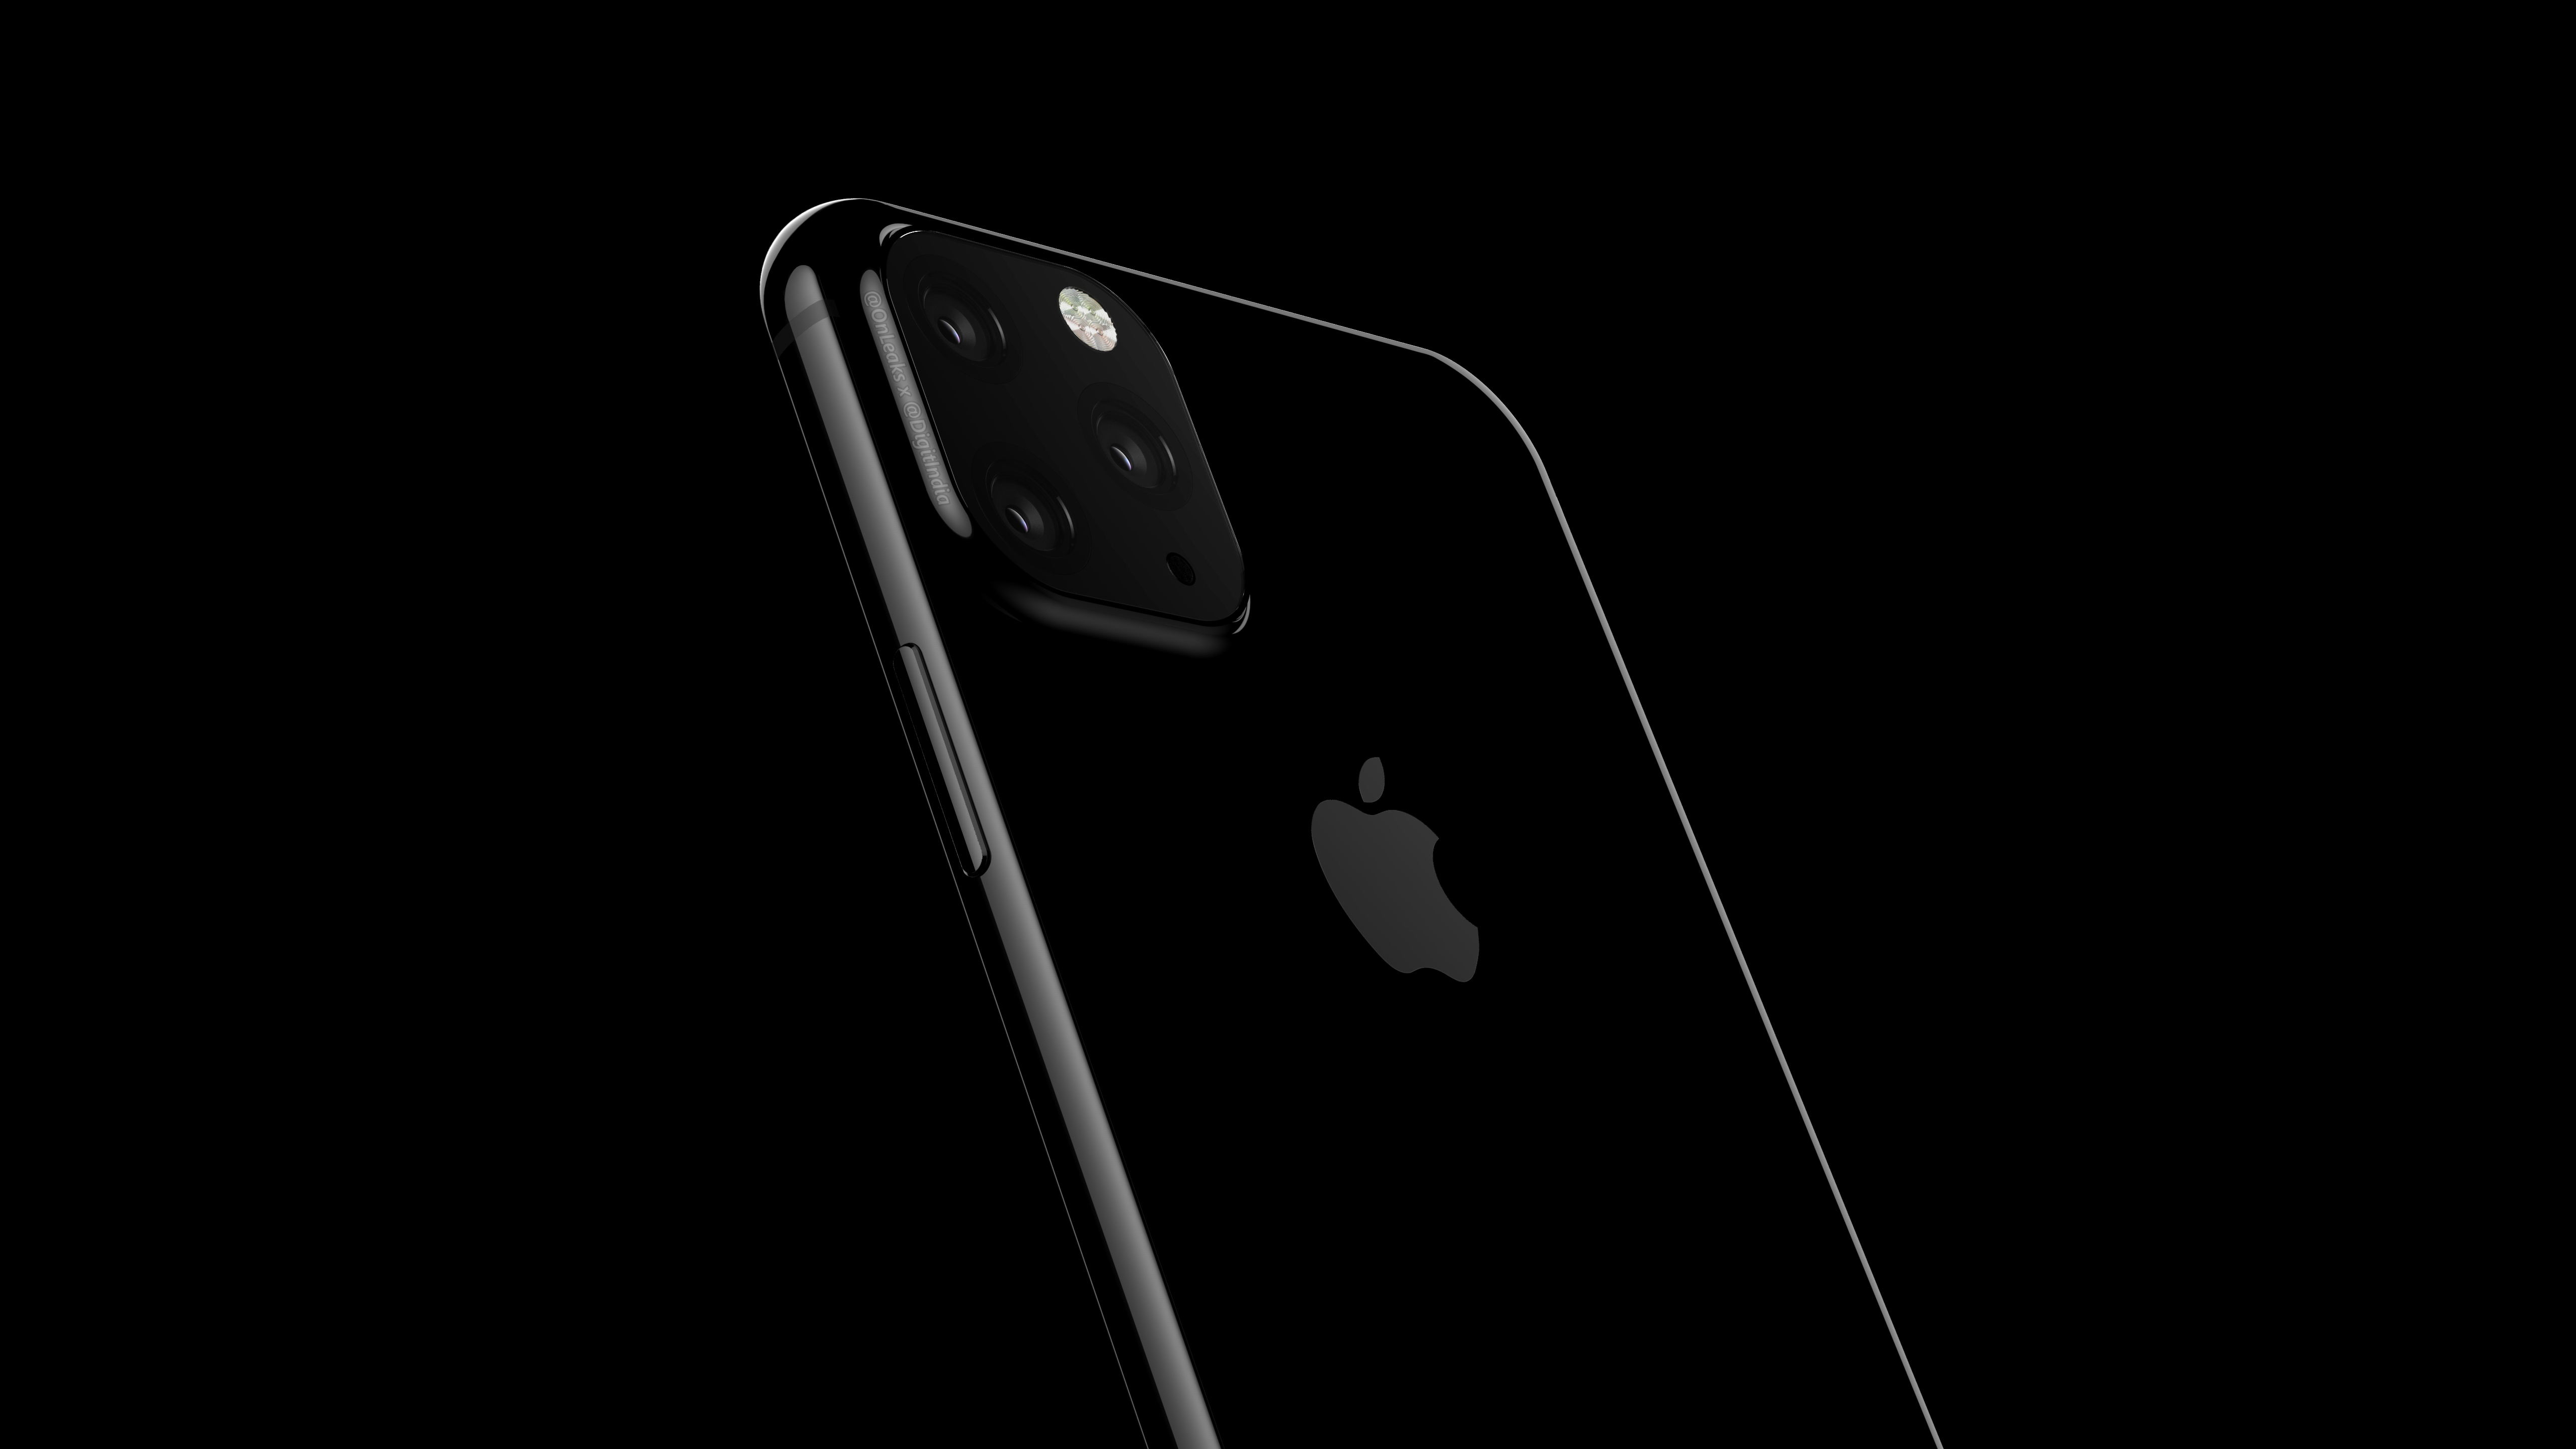 Apple might be hellbent on the bizarre iPhone 11 camera setup